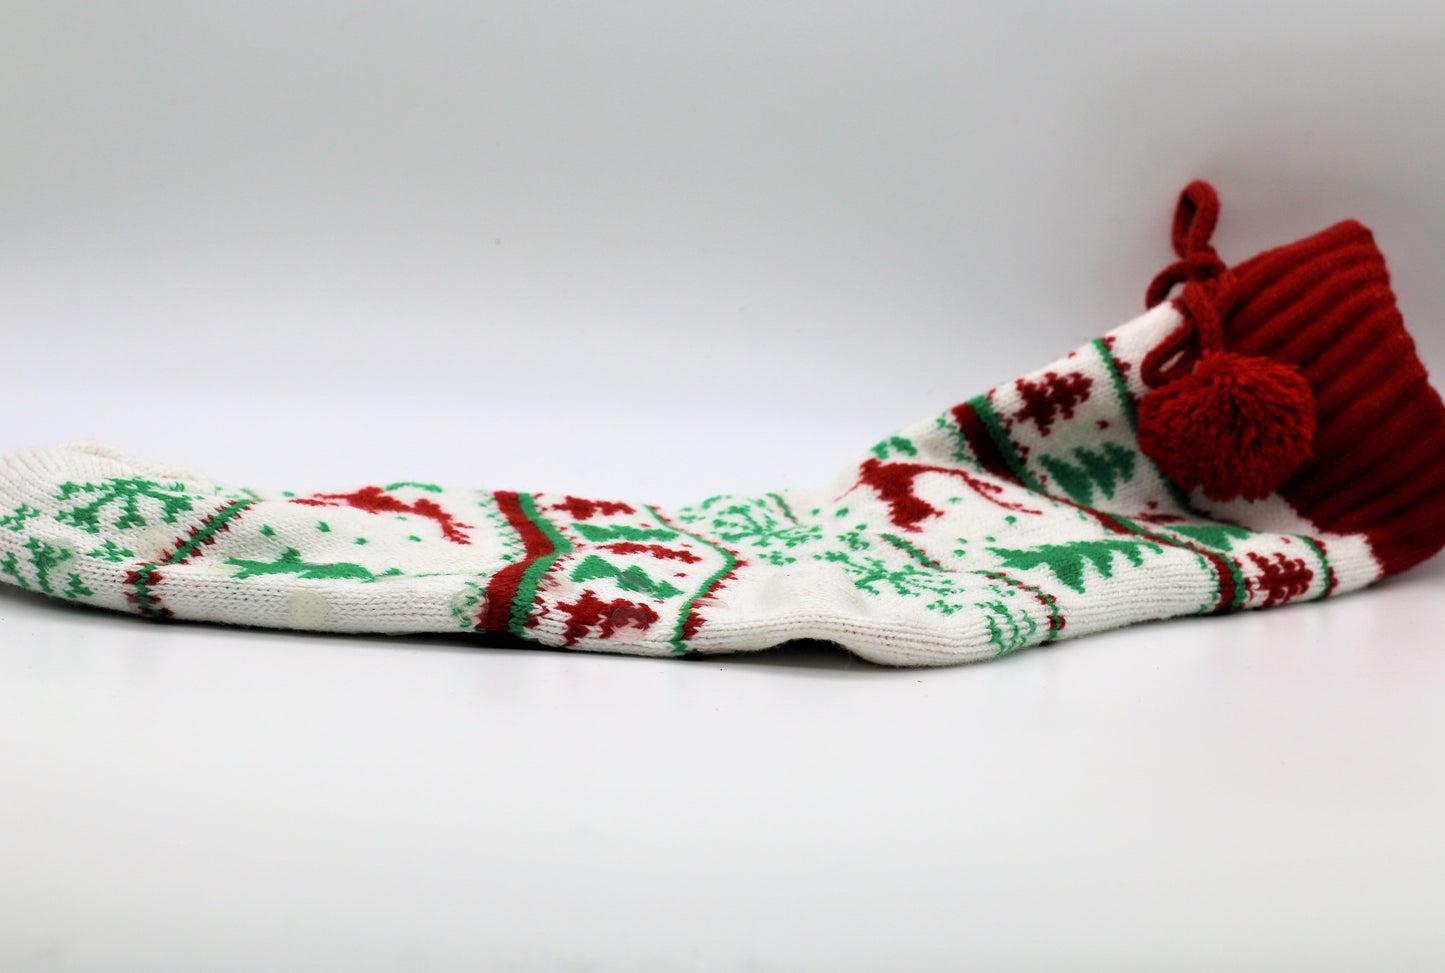 Knit Red and White Reindeer Christmas Socks With Pom Poms